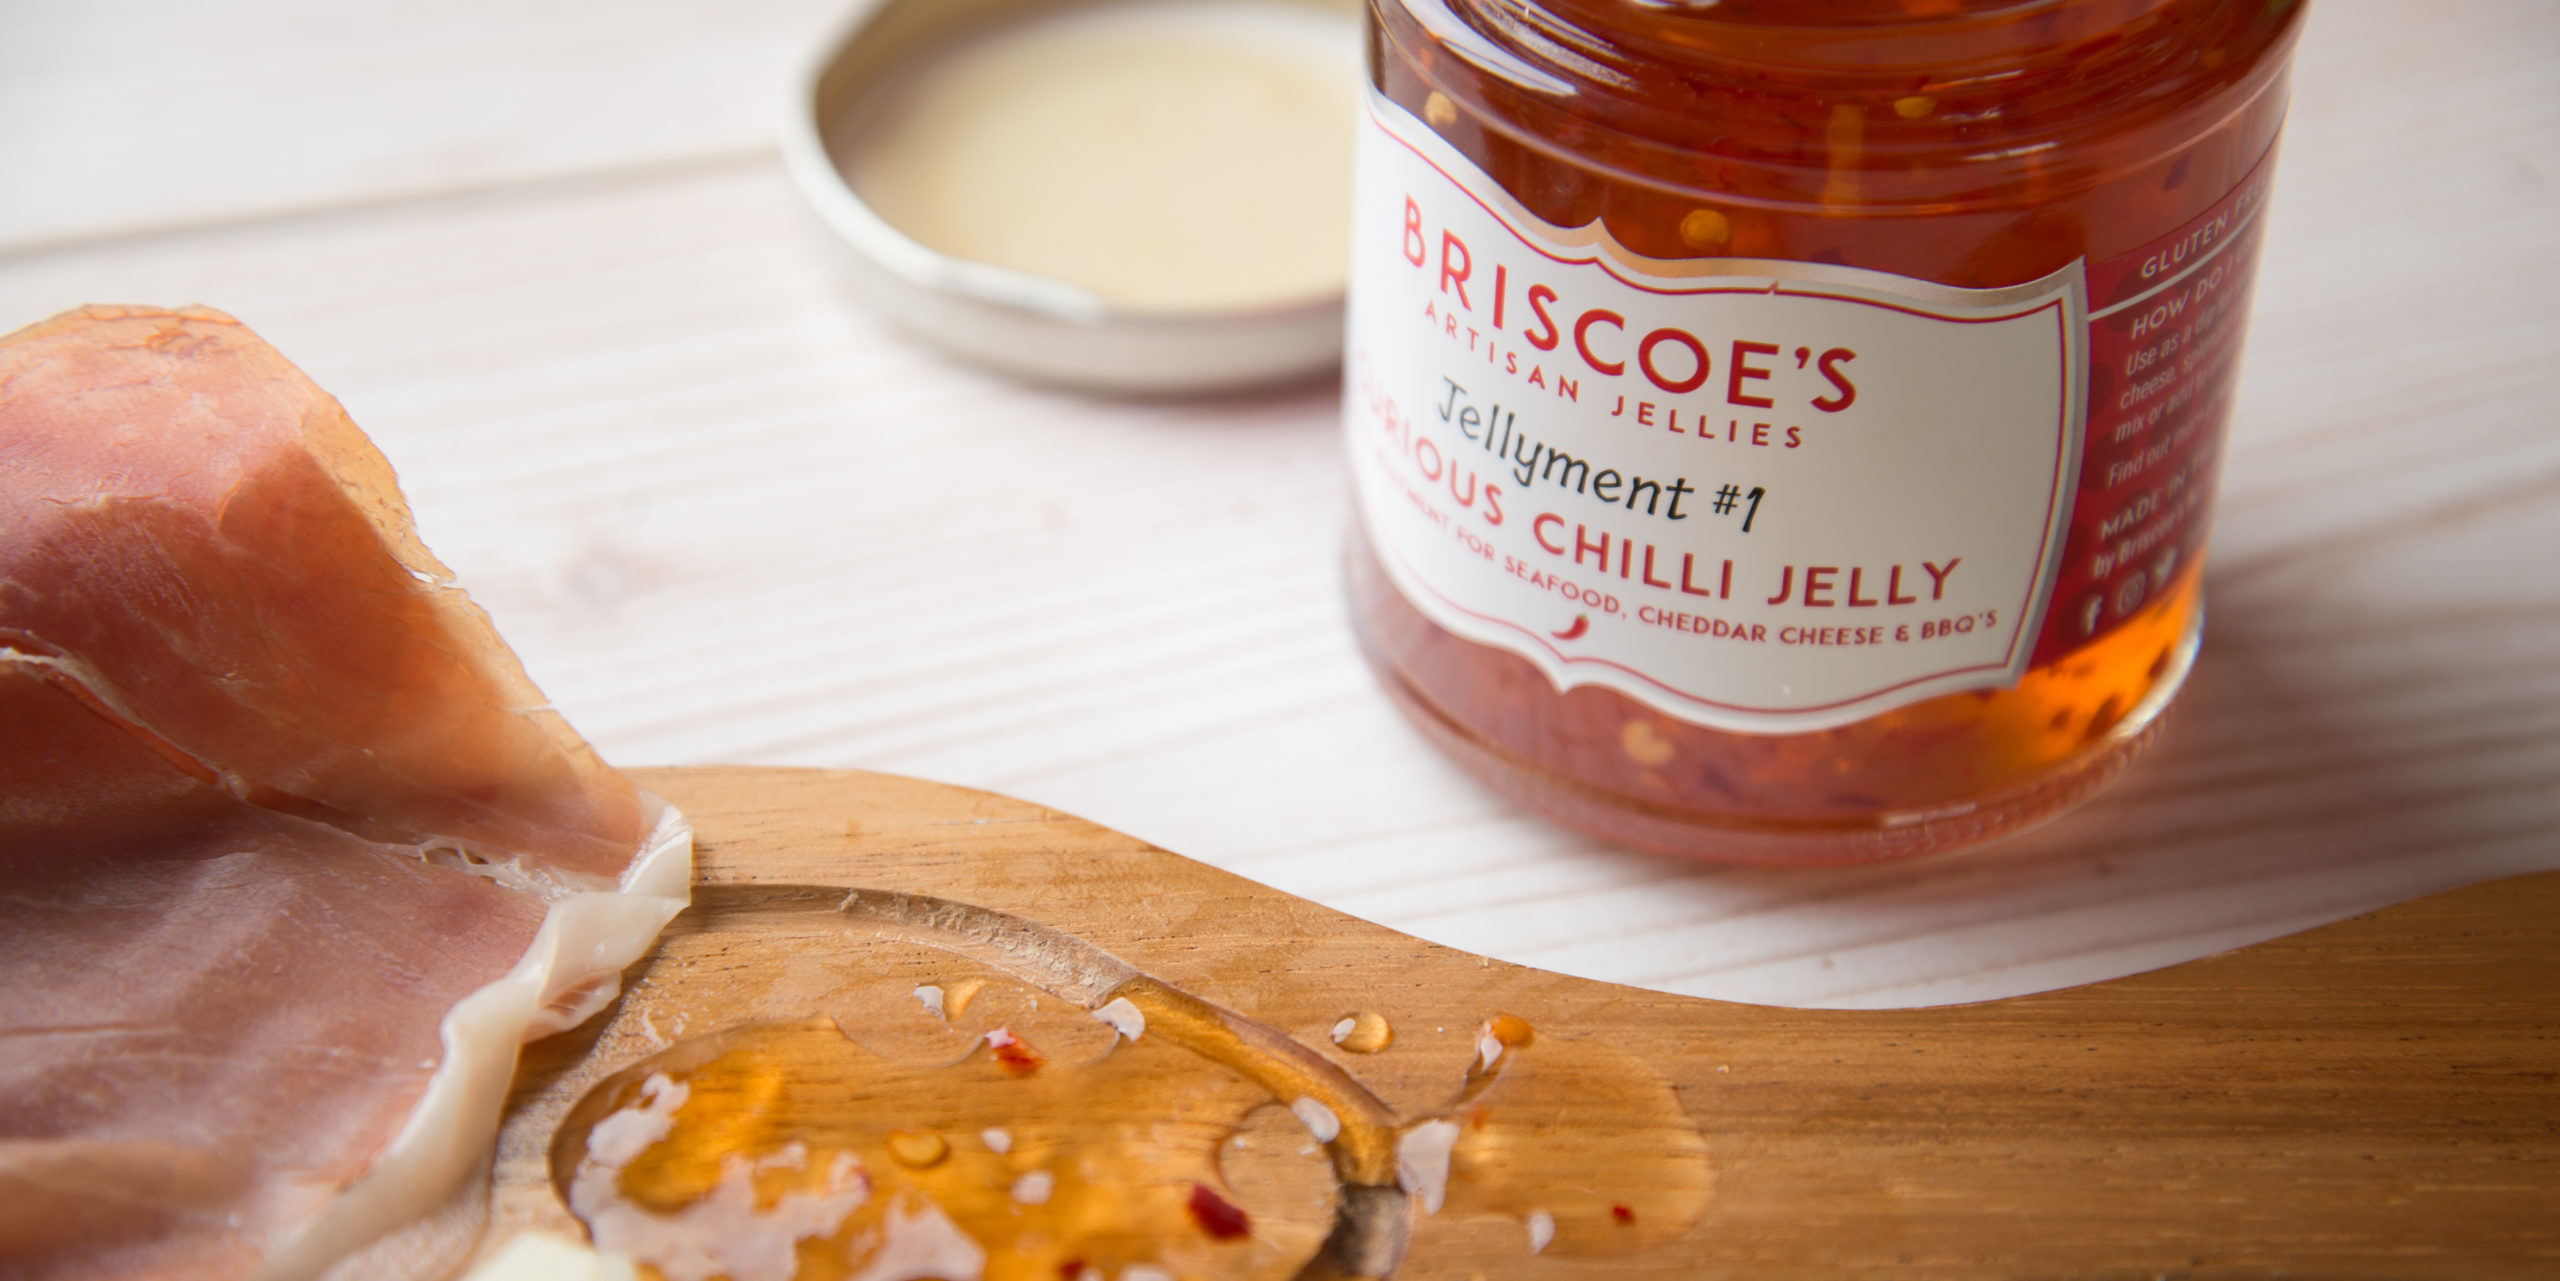 Briscoes Jellyments Branding by Toast Food